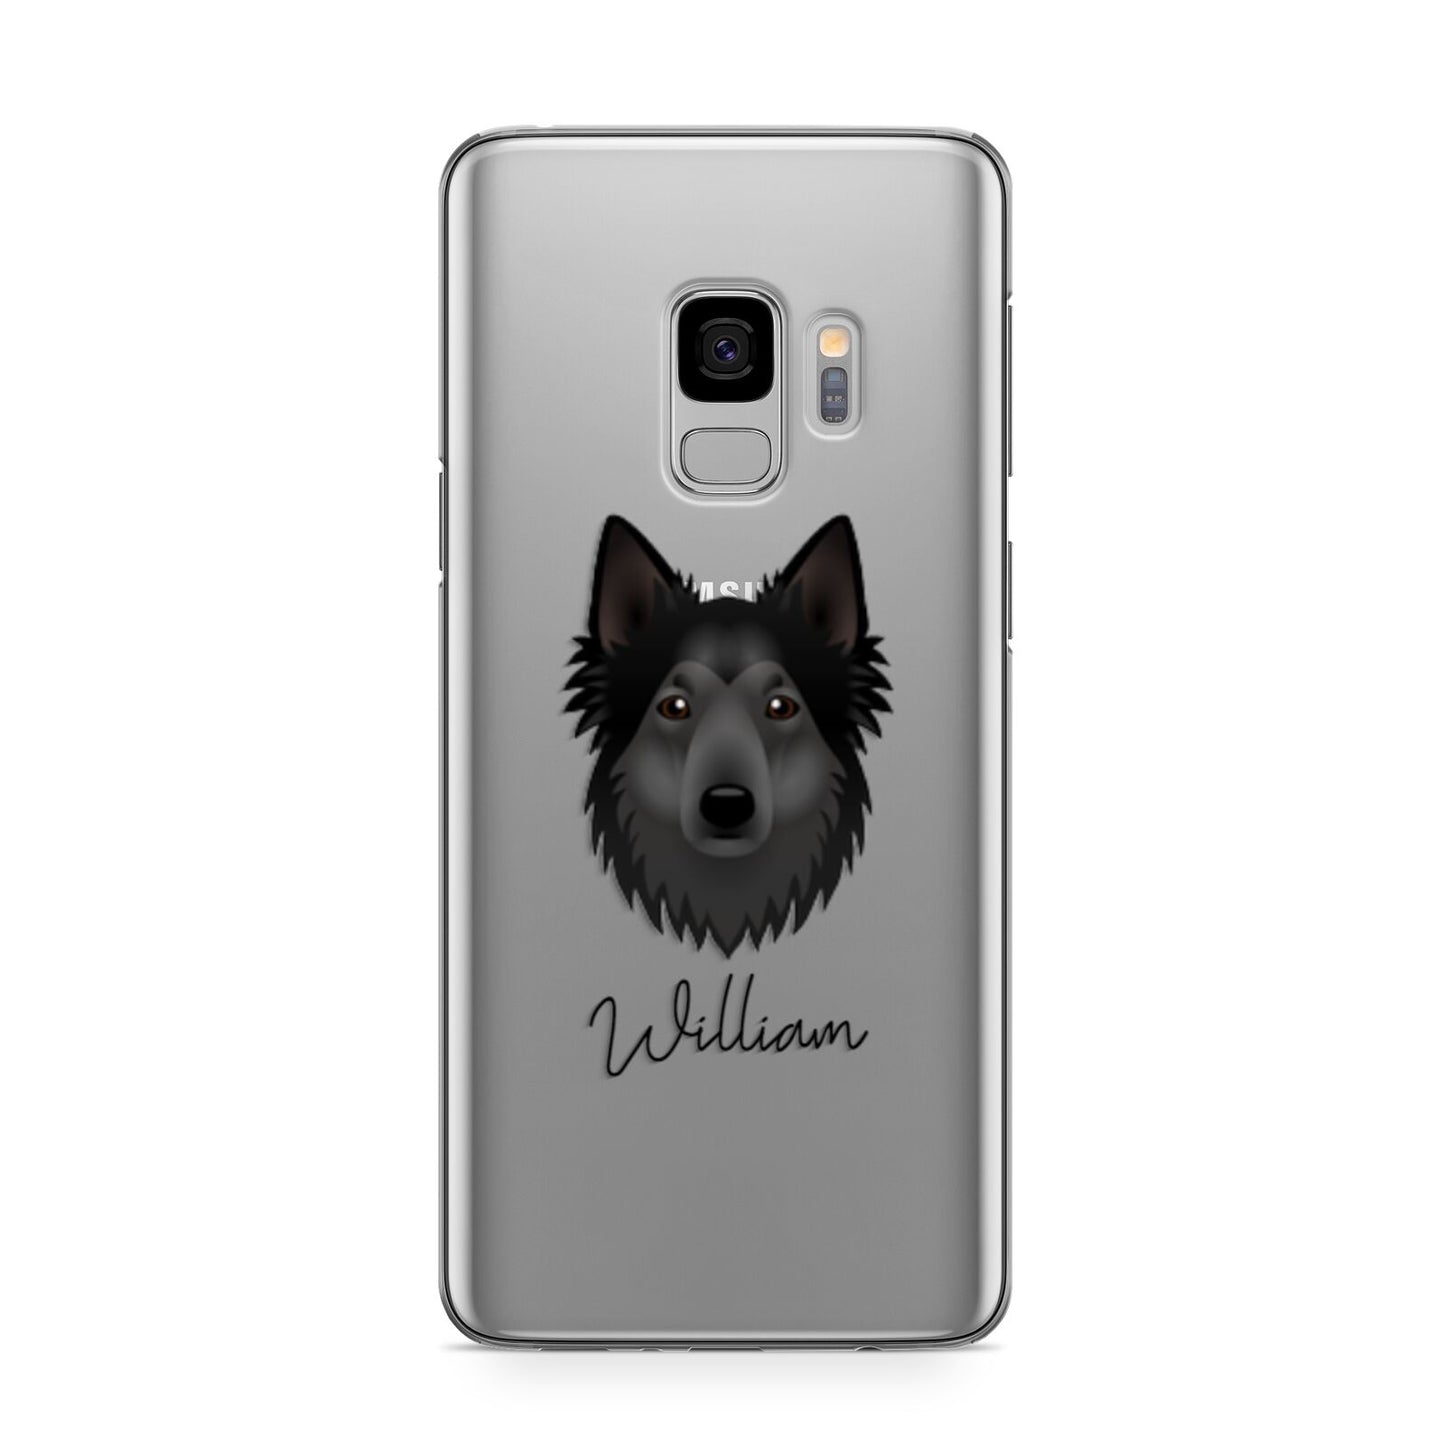 Shollie Personalised Samsung Galaxy S9 Case